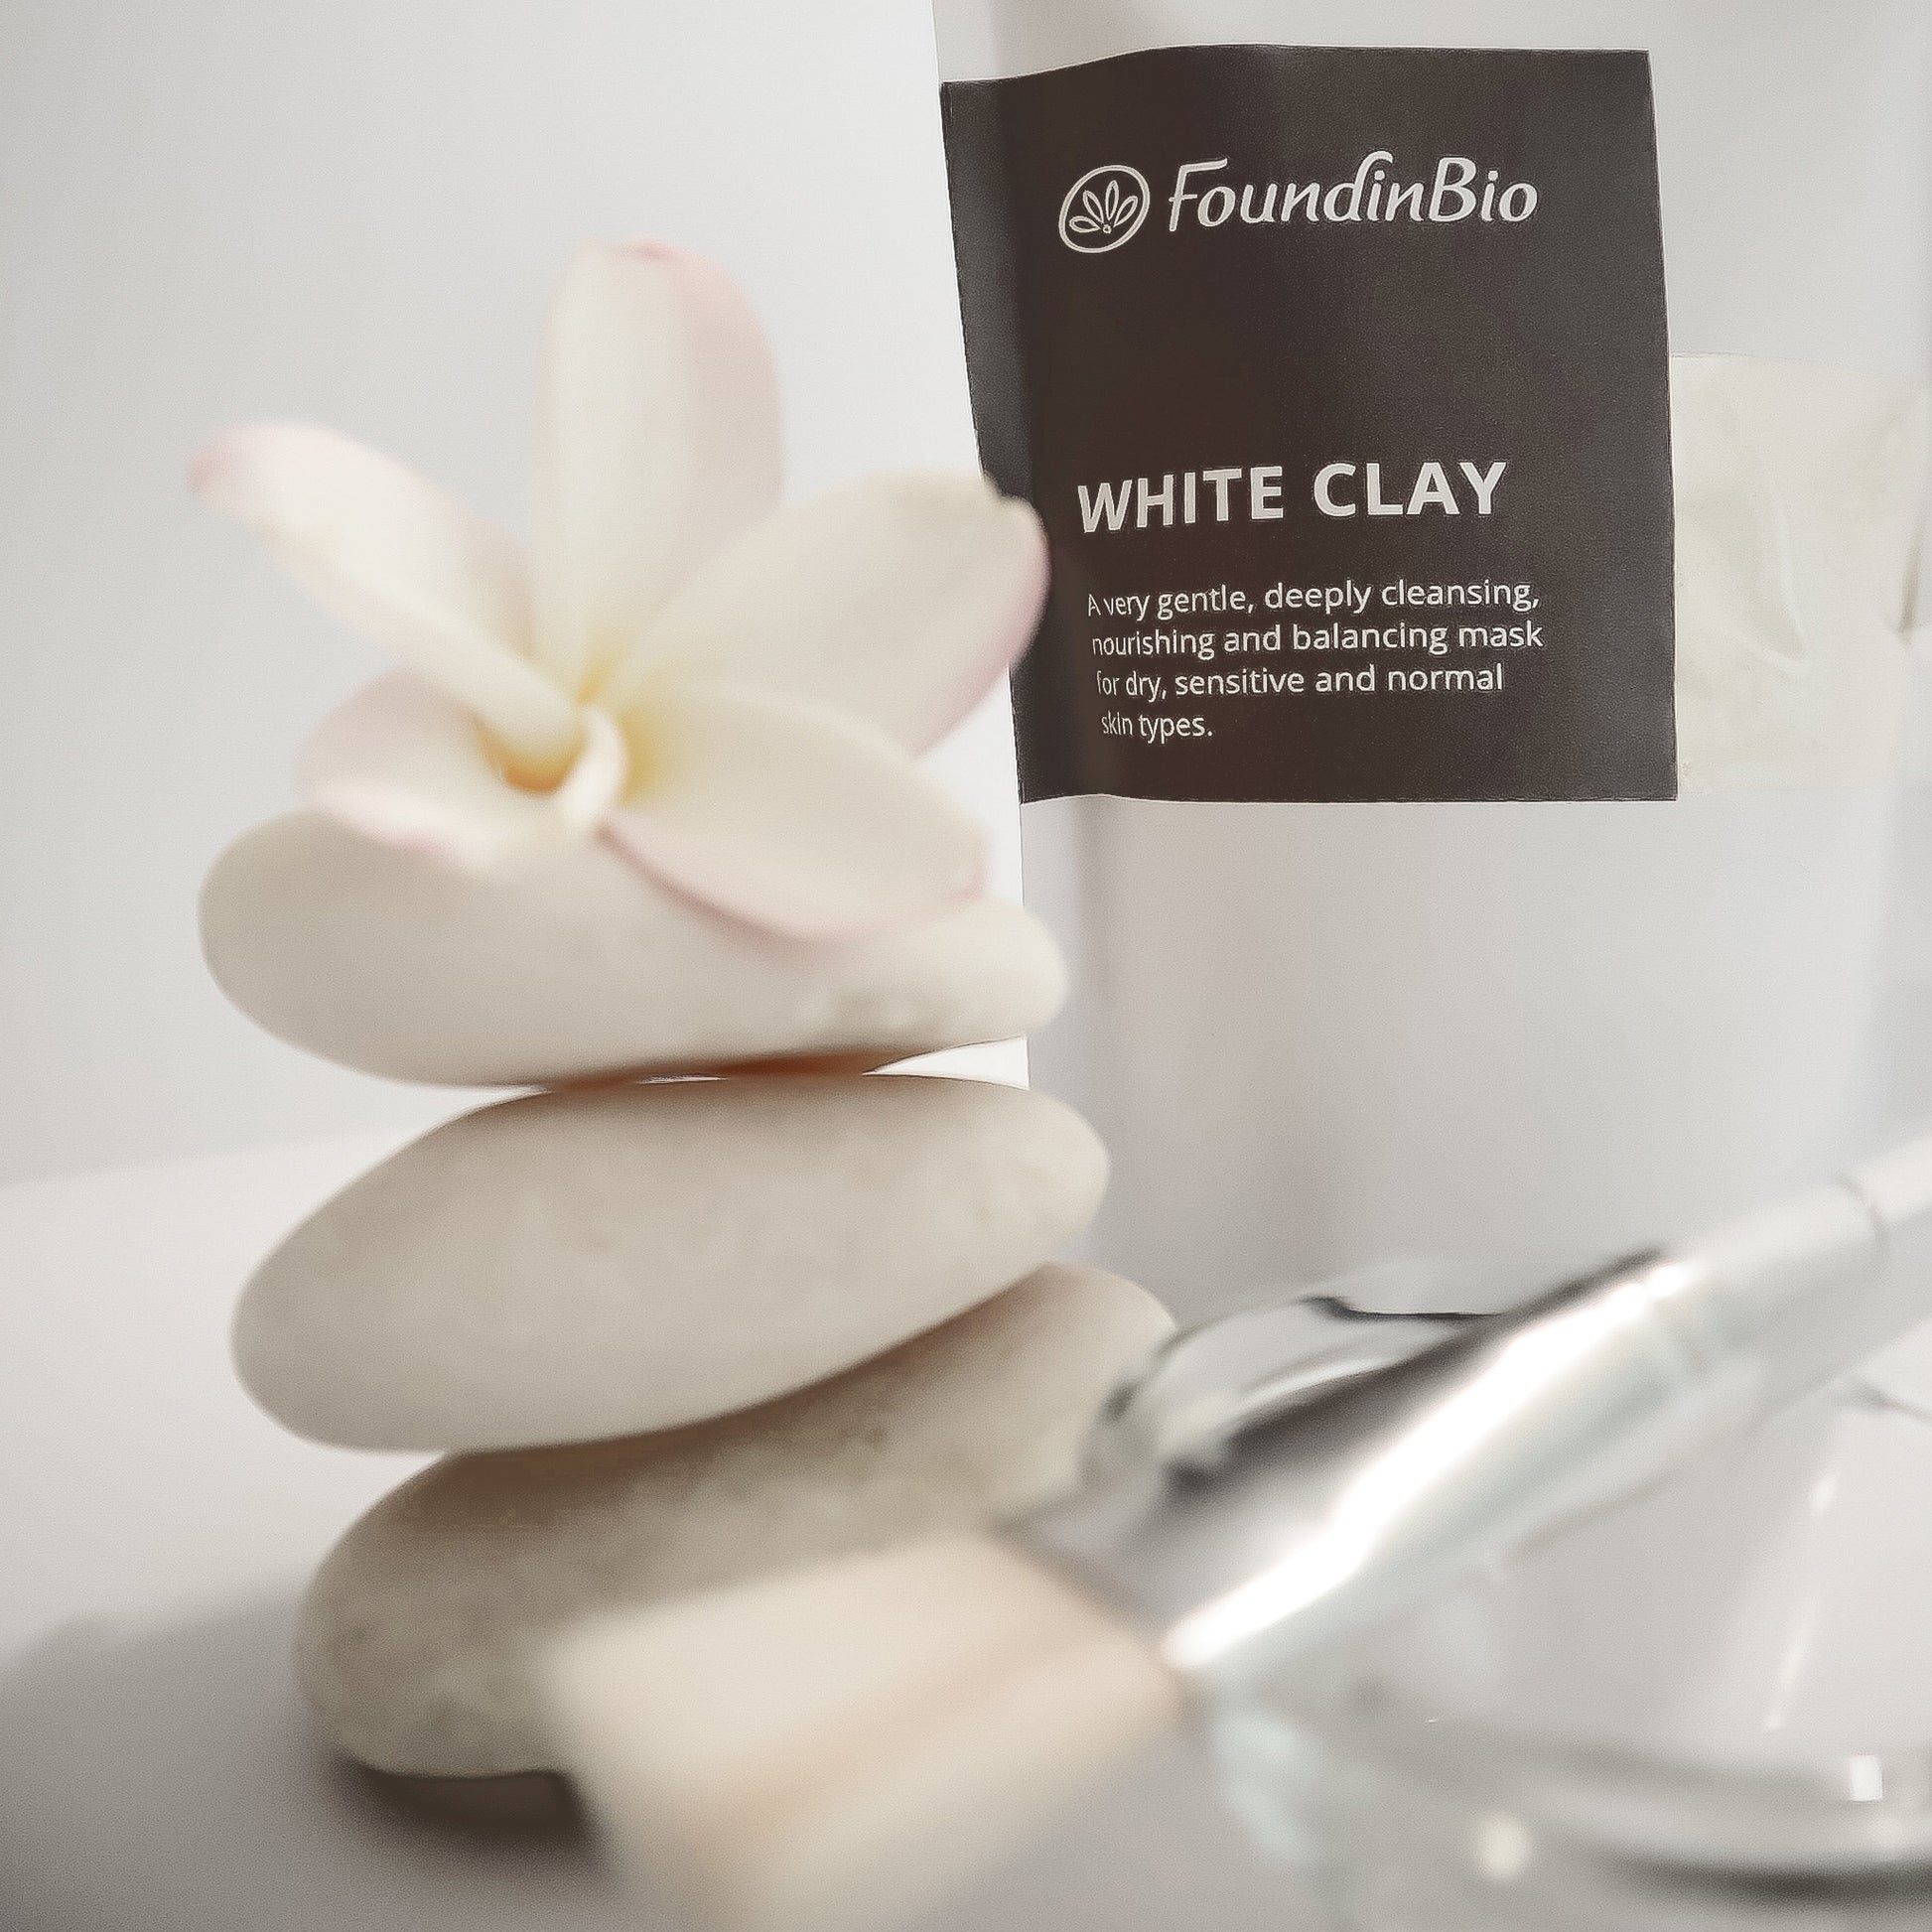 White clay: properties for face, body and hair - Natural Wellbeing